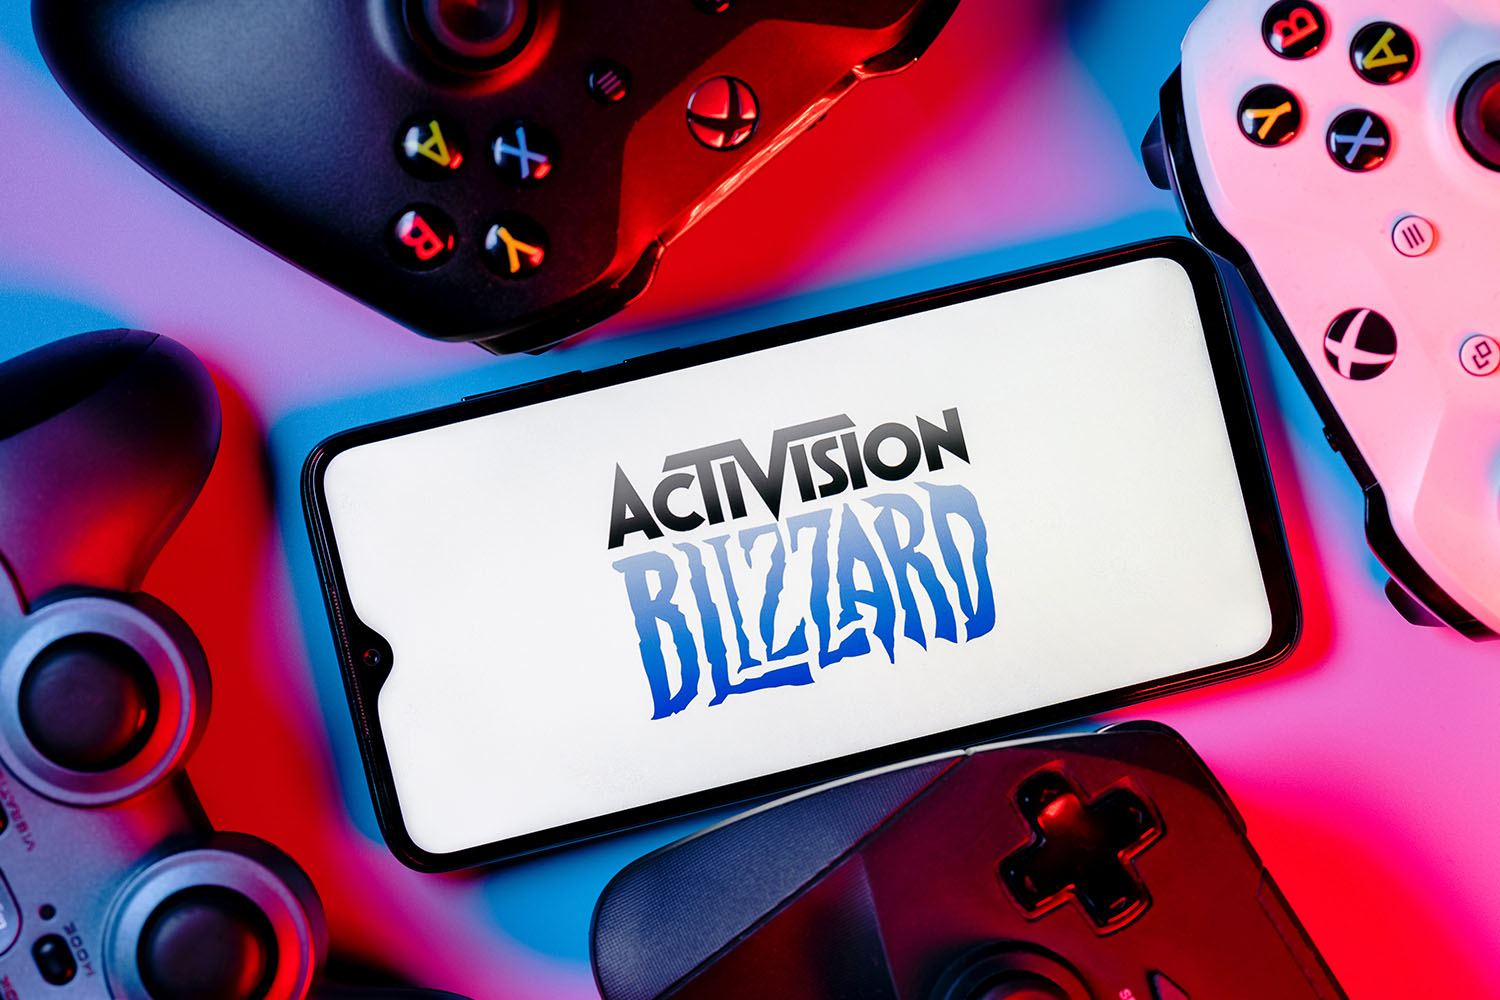 Microsoft, Activision Blizzard and the future of gaming